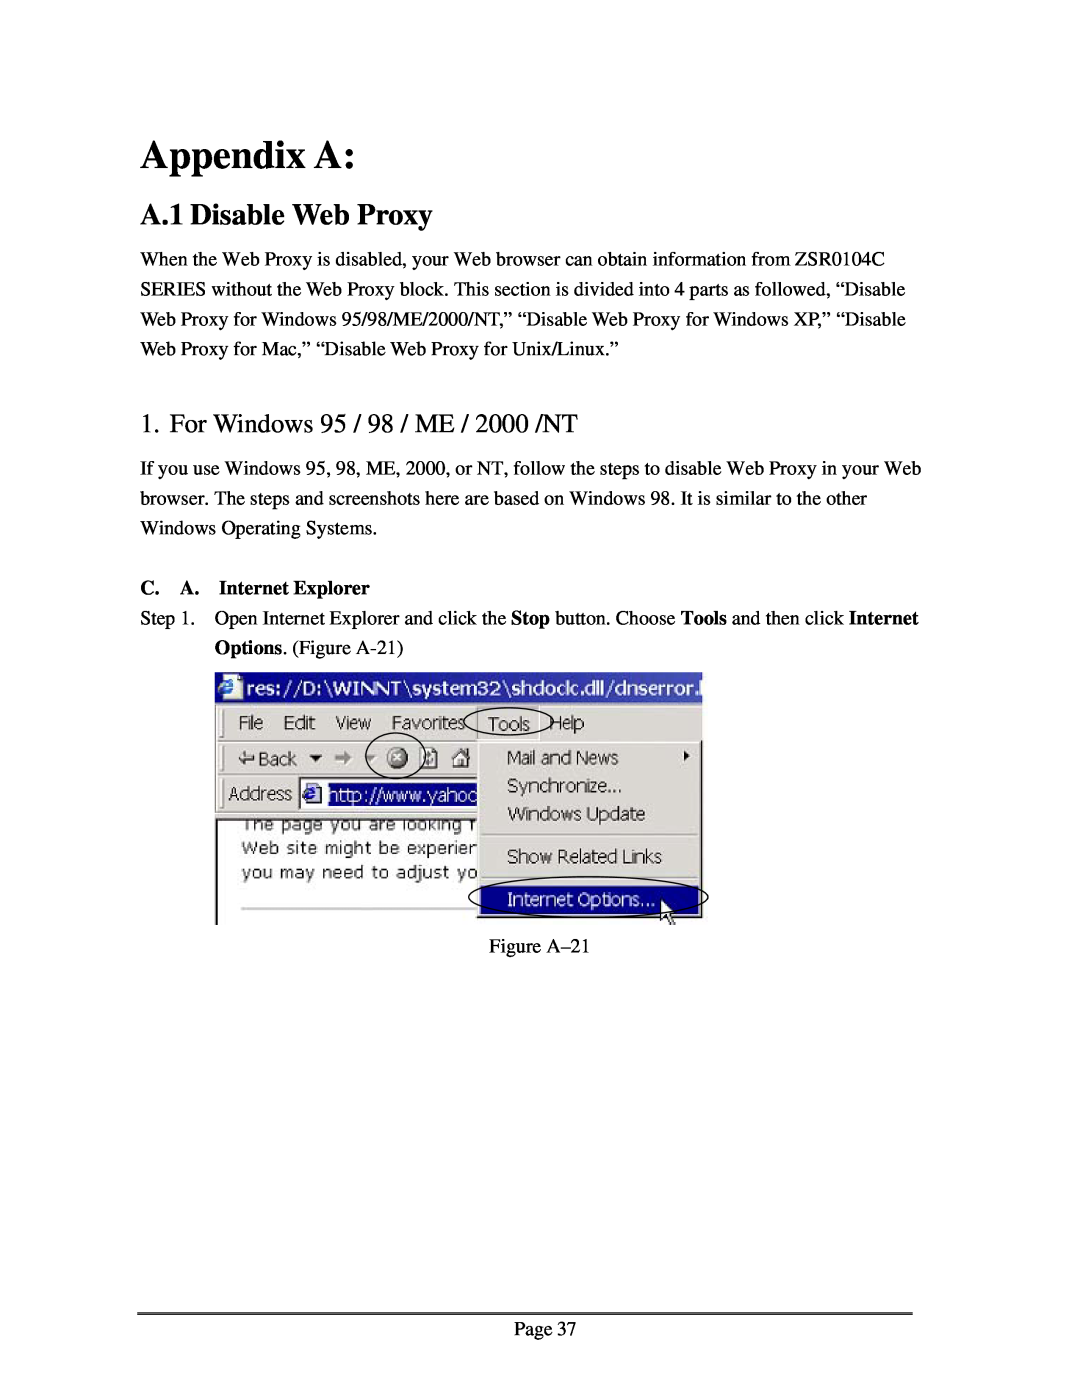 Zonet Technology ZSR0104C Series user manual Appendix A, A.1 Disable Web Proxy, For Windows 95 / 98 / ME / 2000 /NT 